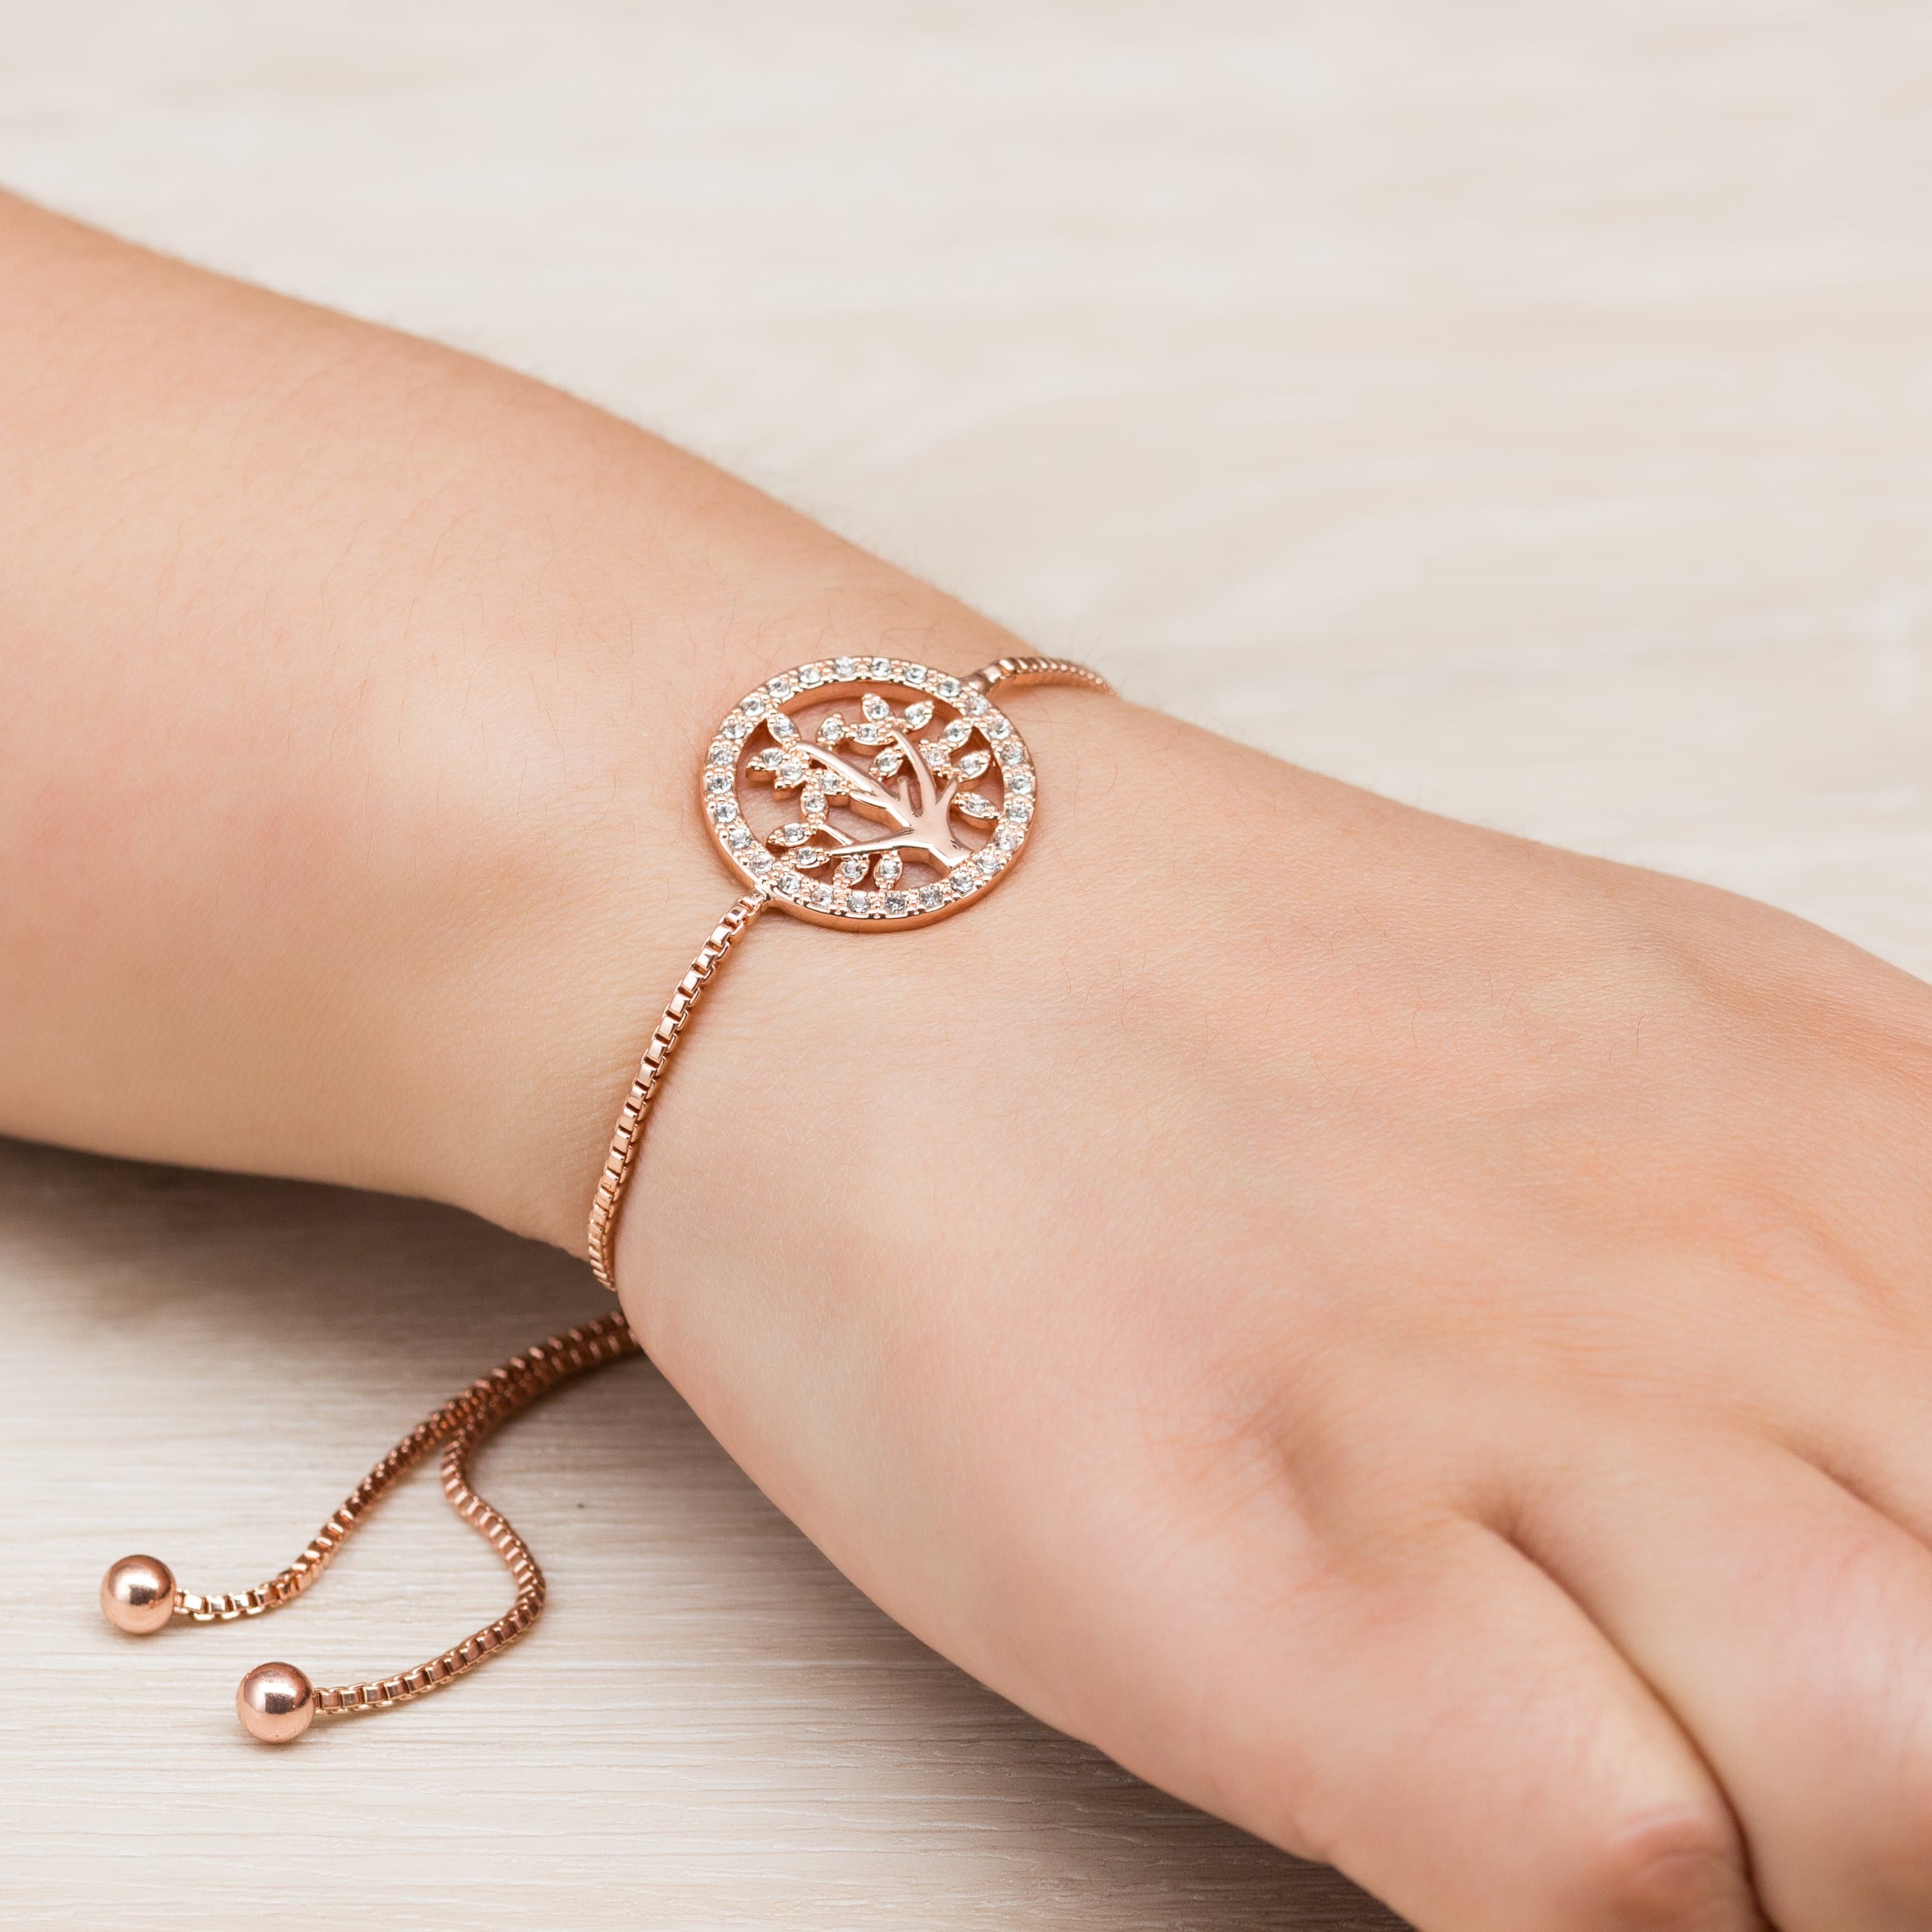 Rose Gold Plated Tree of Life Bracelet Created with Zircondia® Crystals